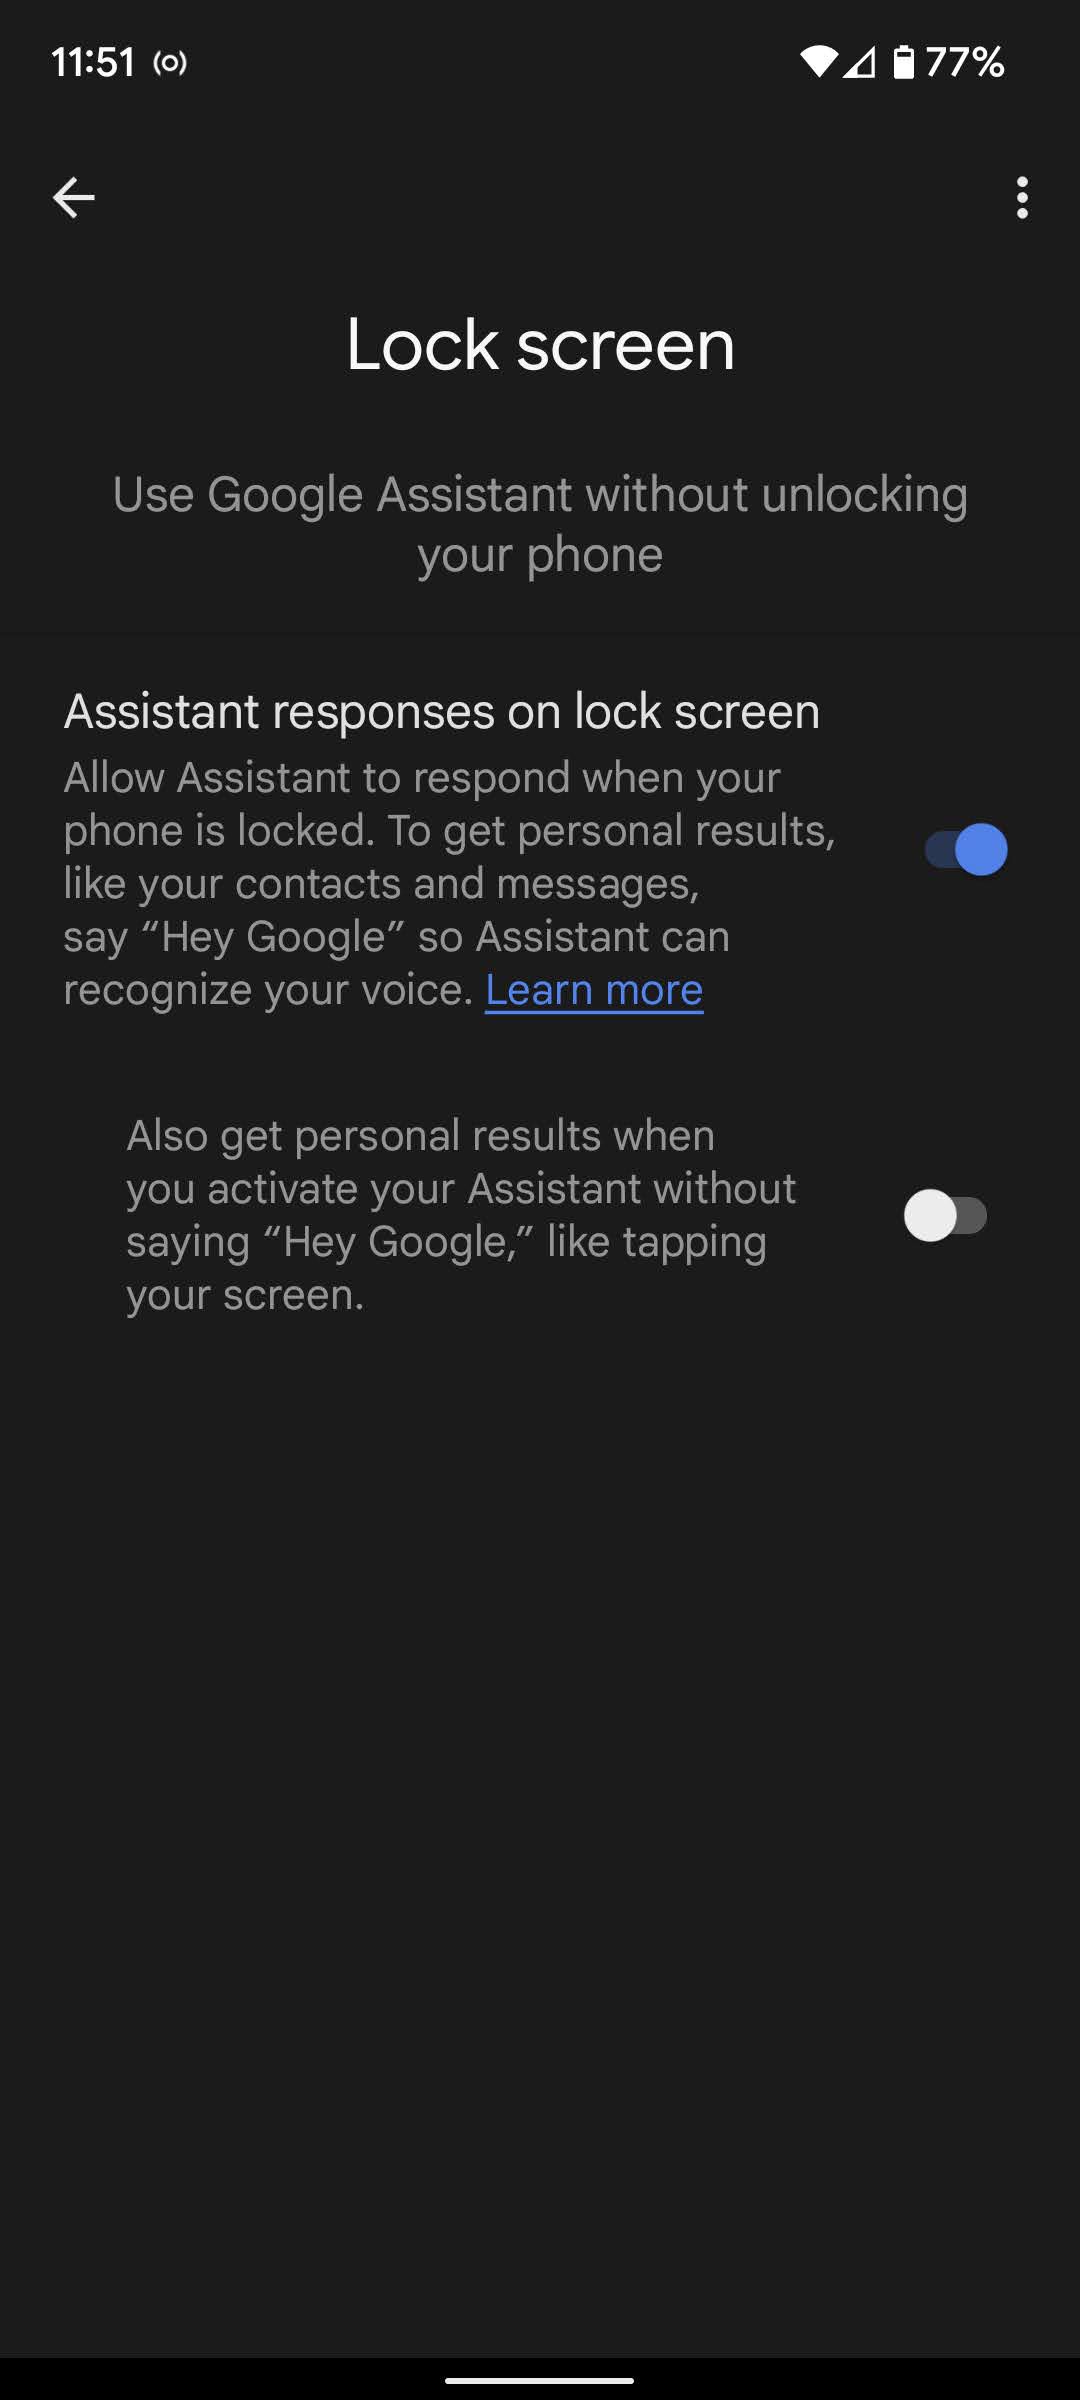 You can enable Assistant responses on lock screen; below it, you can get results when just tapping on the screen